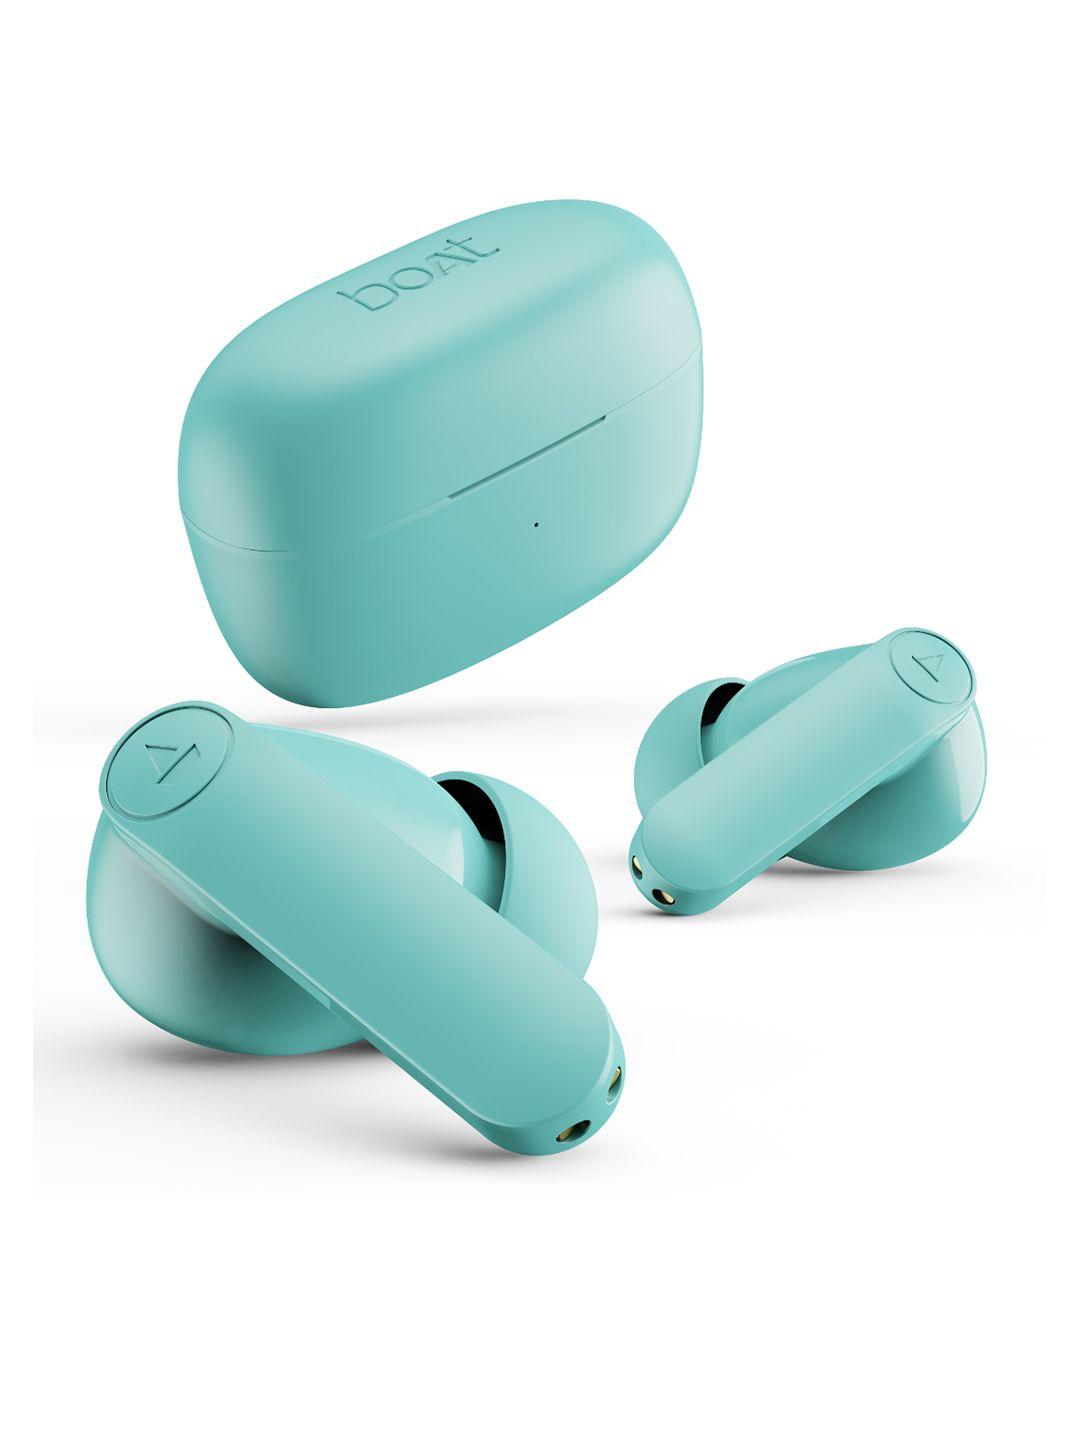 boat-airdopes-131-pro-m-with-quad-mic-enx-bluetooth-earbuds---mint-green